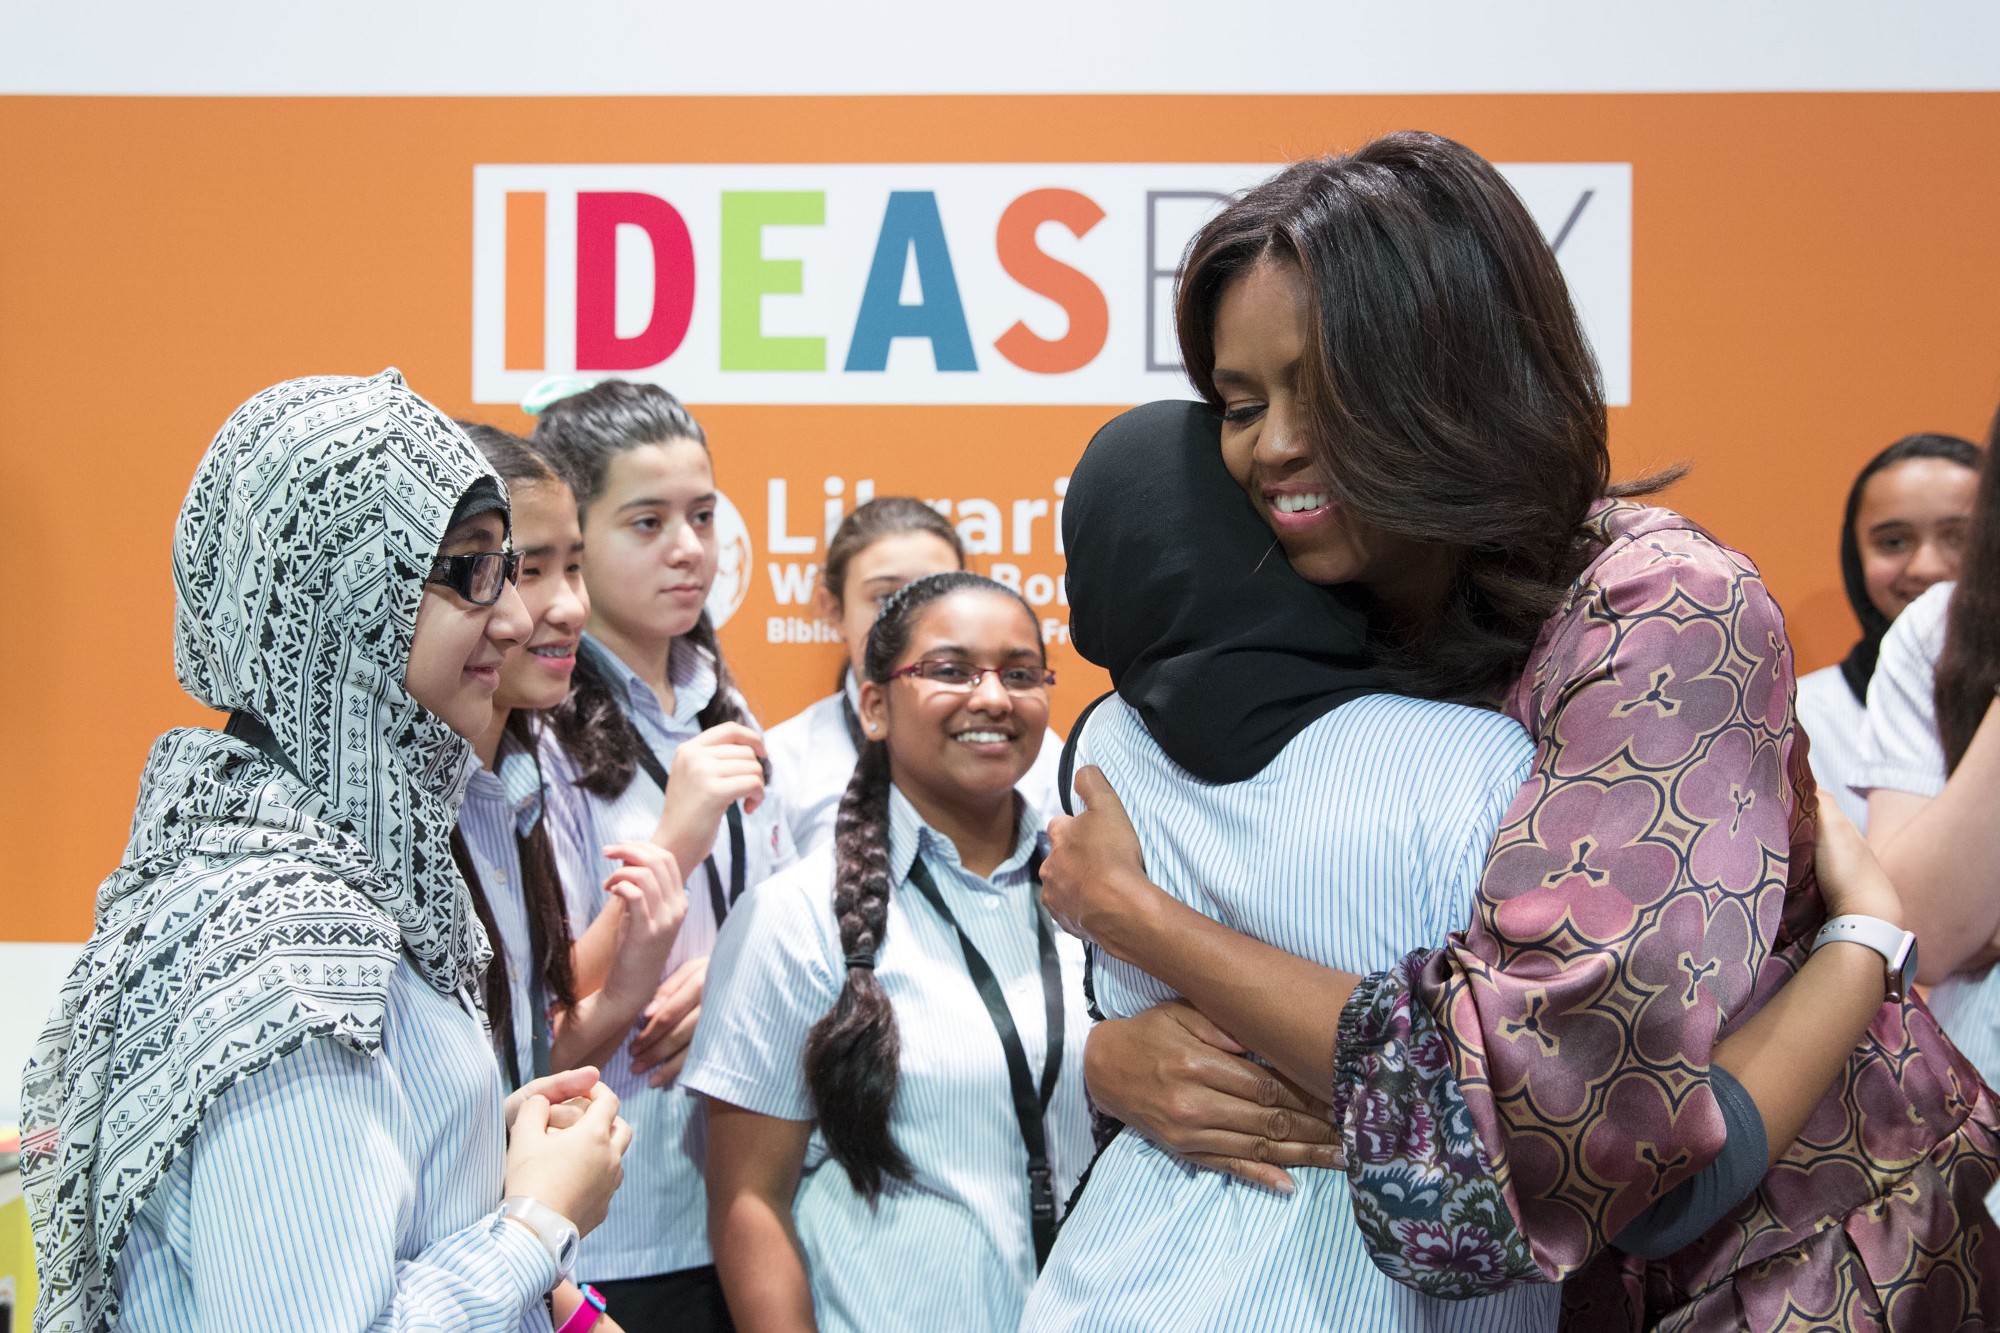  First Lady Michelle Obama hugs a student during a tour of the WISE Summit Learning Labs during the 2015 World Innovation Summit for Education at the Qatar National Convention Centre in Doha, Qatar, Nov. 4, 2015. (Official White House Photo by Amanda Lucidon)